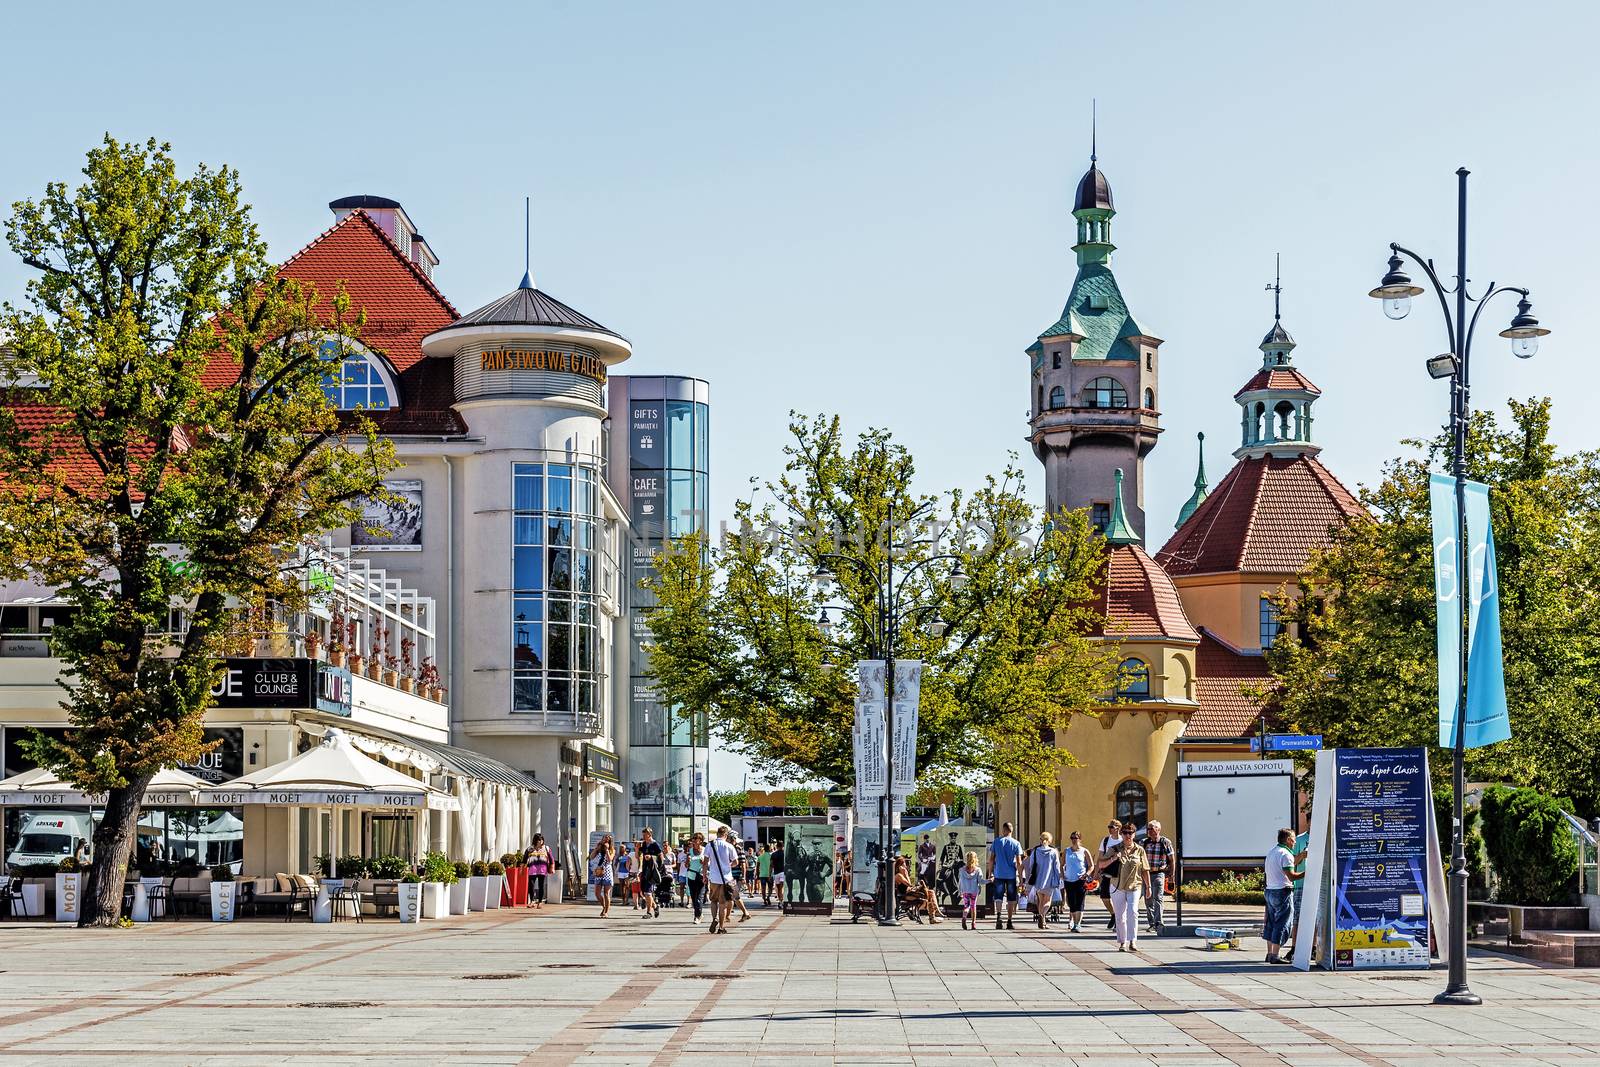 Scenes from main promenade in Sopot. The city is a major health-spa and tourist resort destination in Poland with the longest wooden pier in Europe at 515.5 meters.